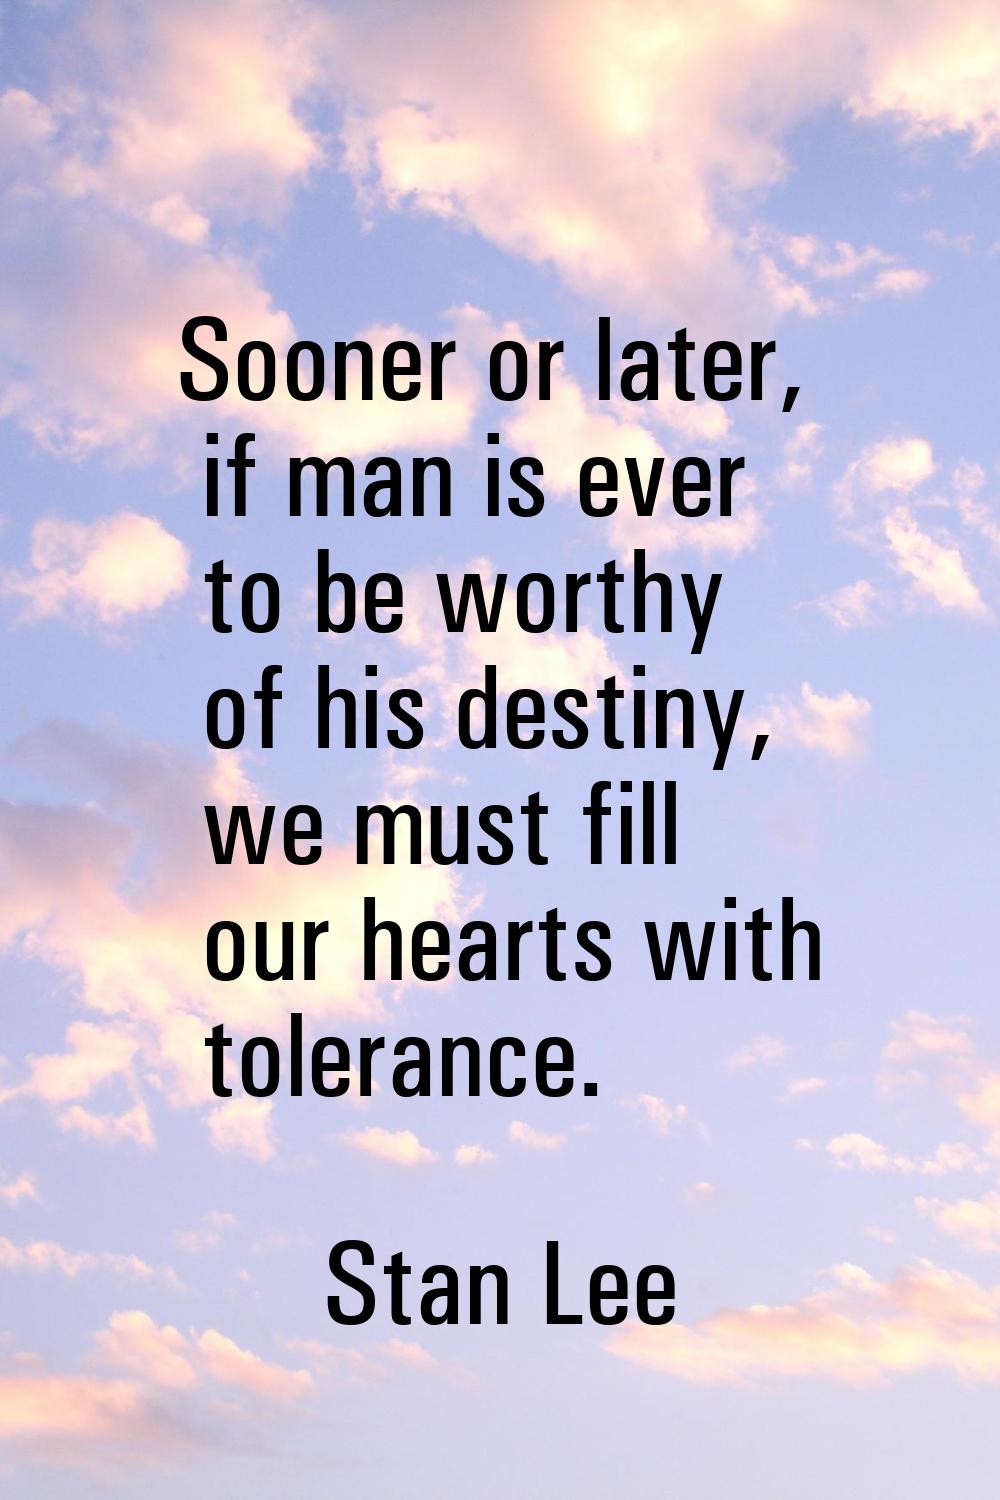 Sooner or later, if man is ever to be worthy of his destiny, we must fill our hearts with tolerance